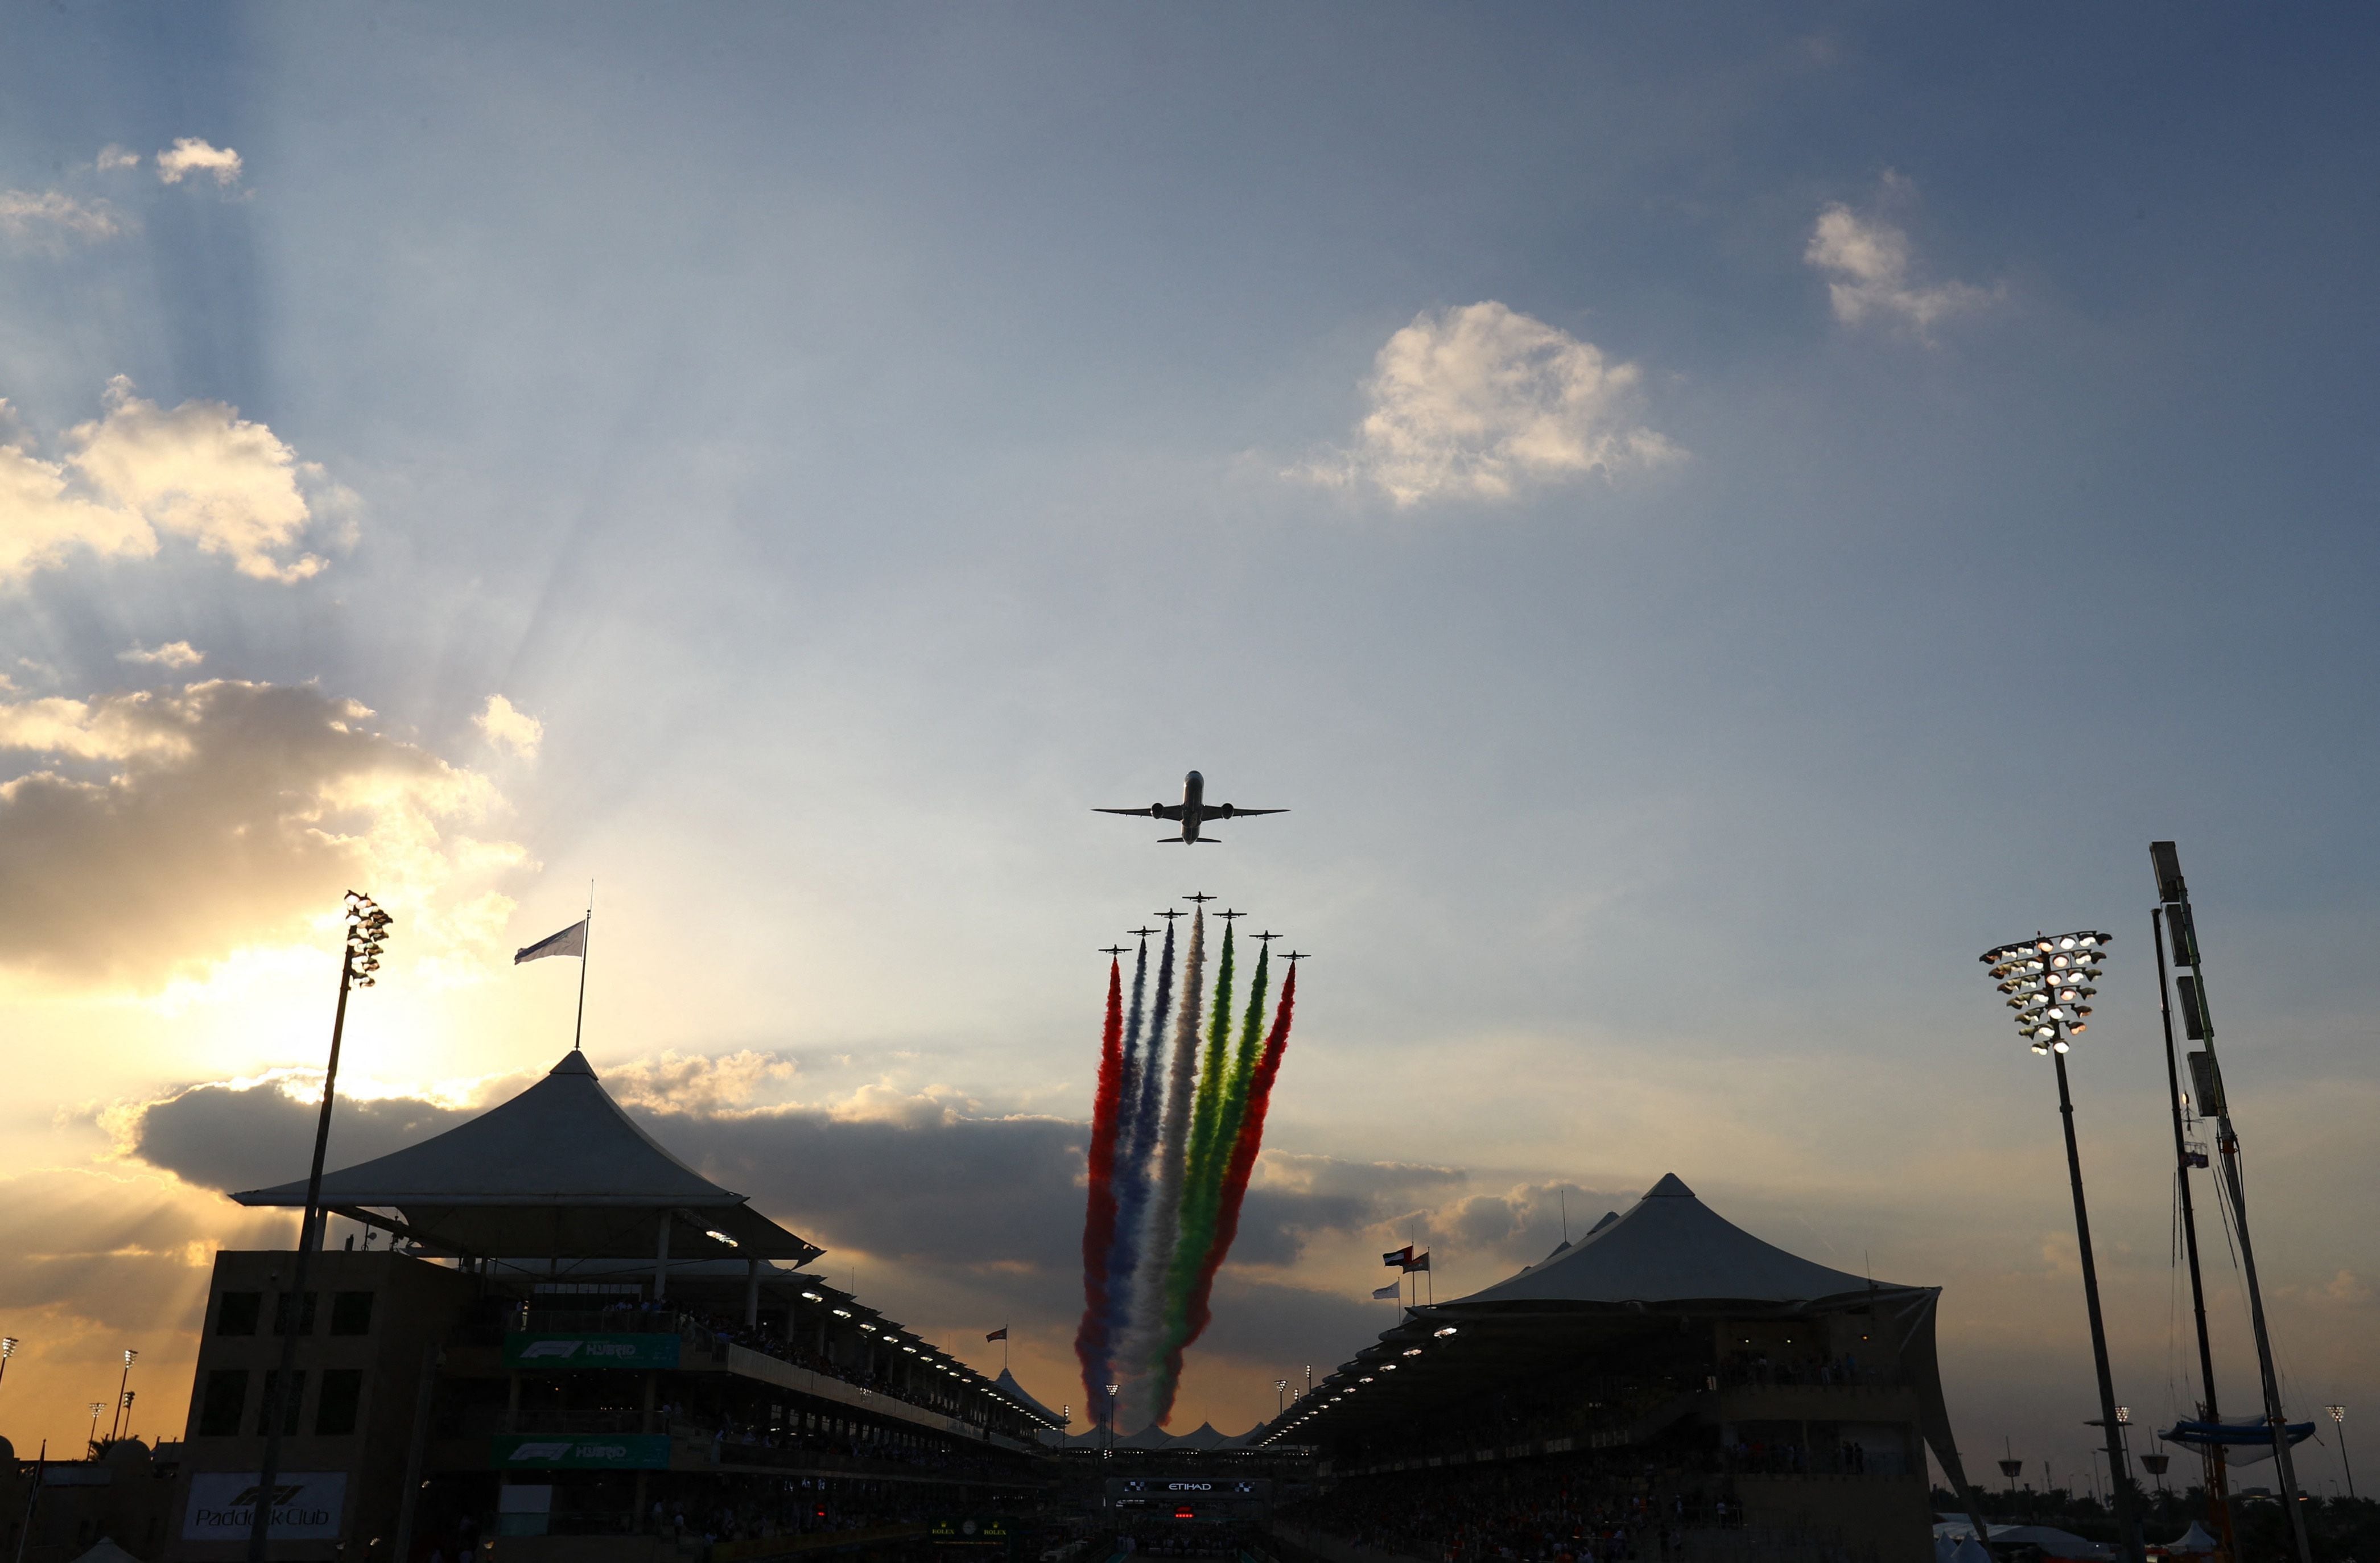 Planes flew over the Yas Marina circuit 